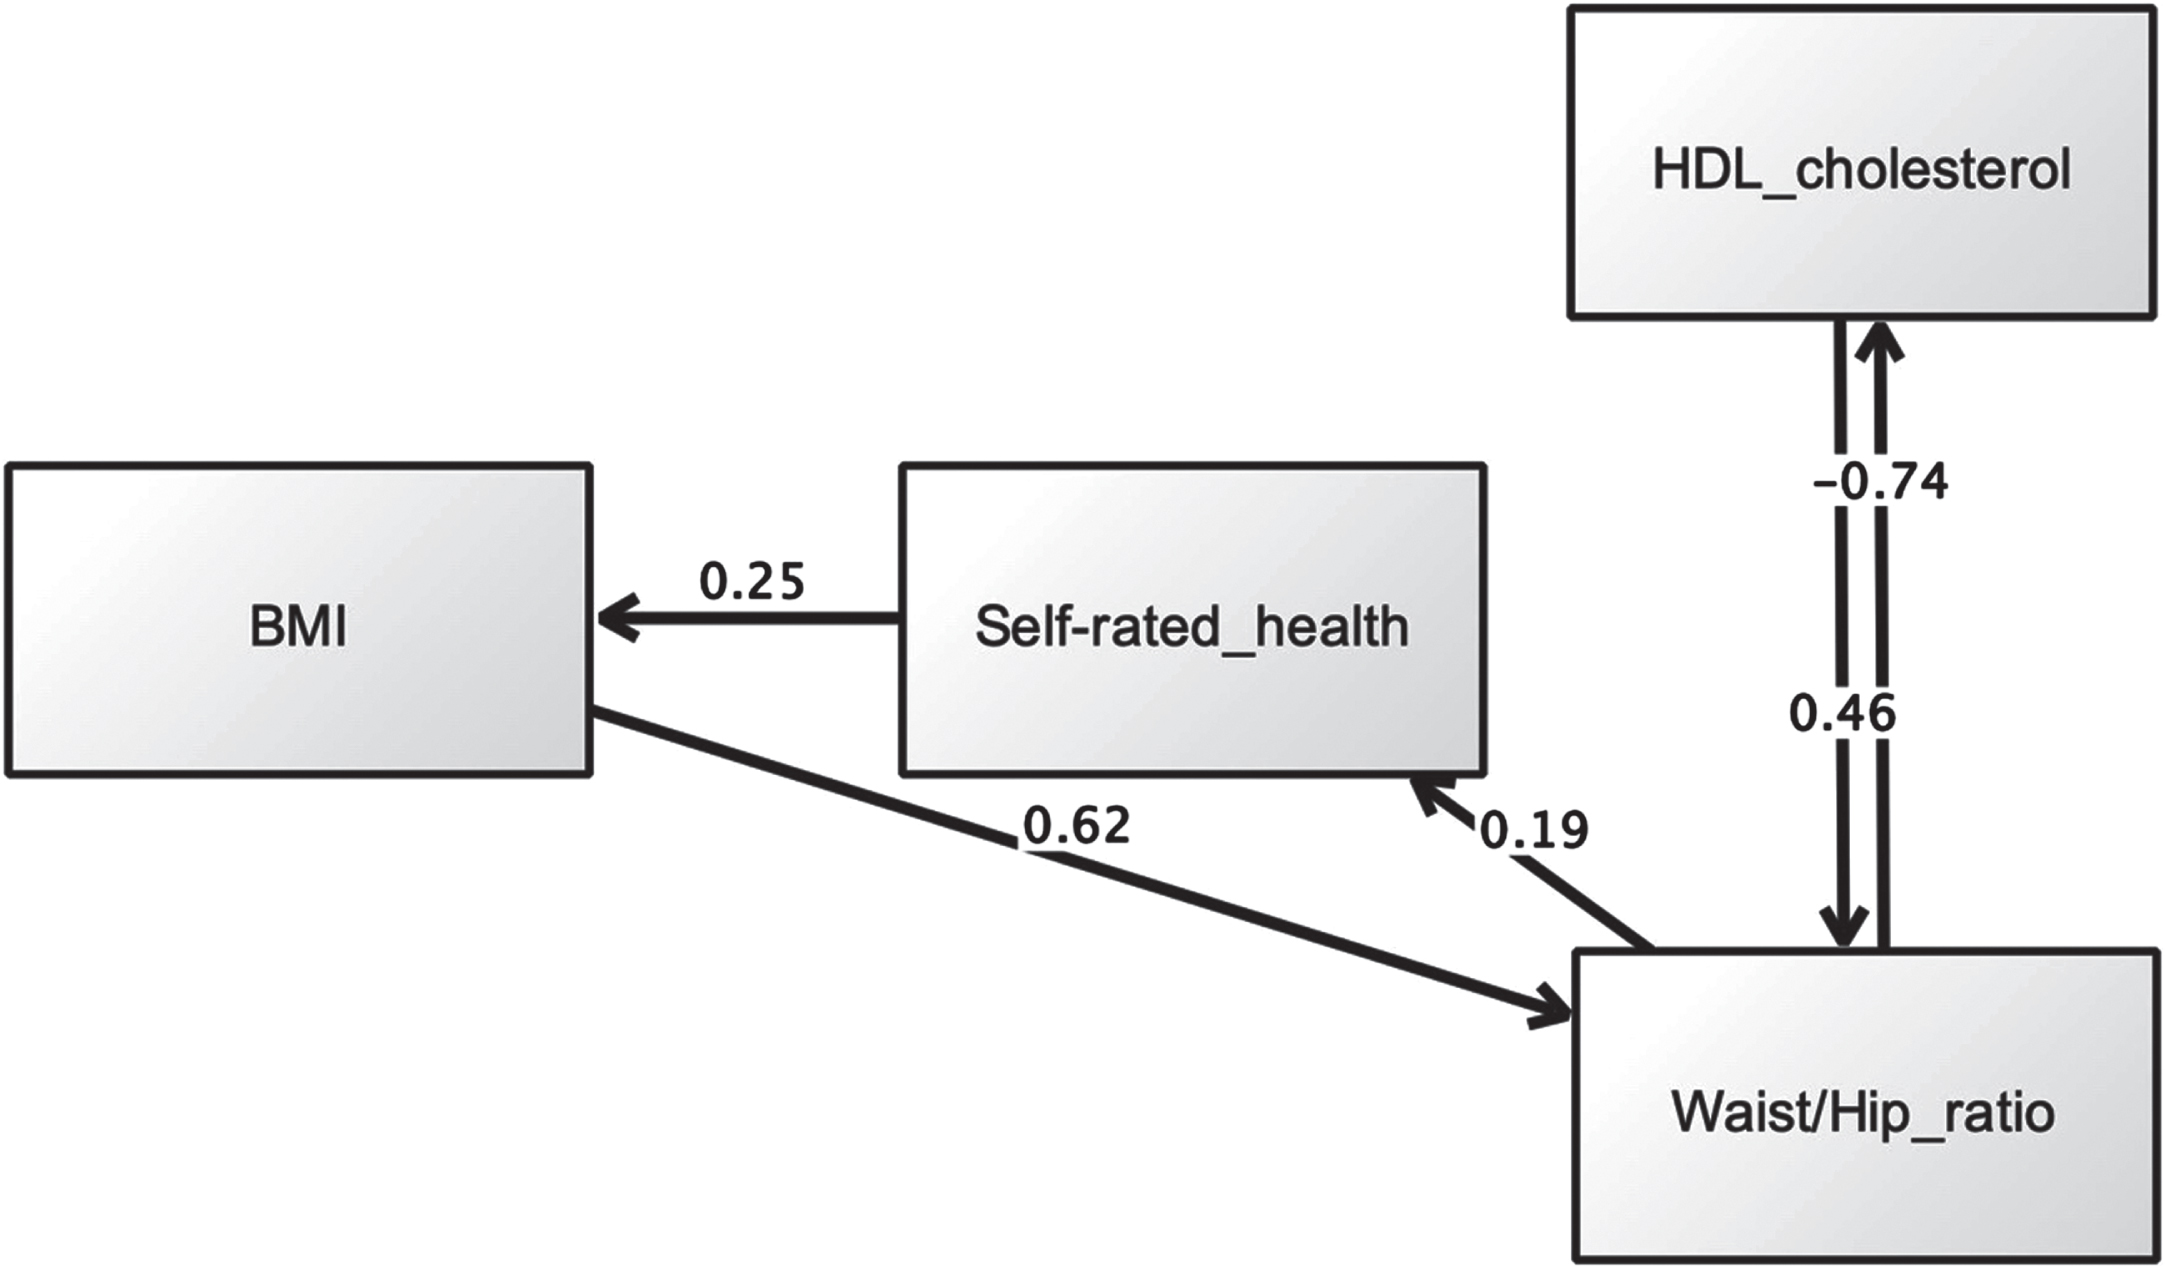 First SEM model suggesting SRH mediates the relationship between BMI and waist/hip ratio.